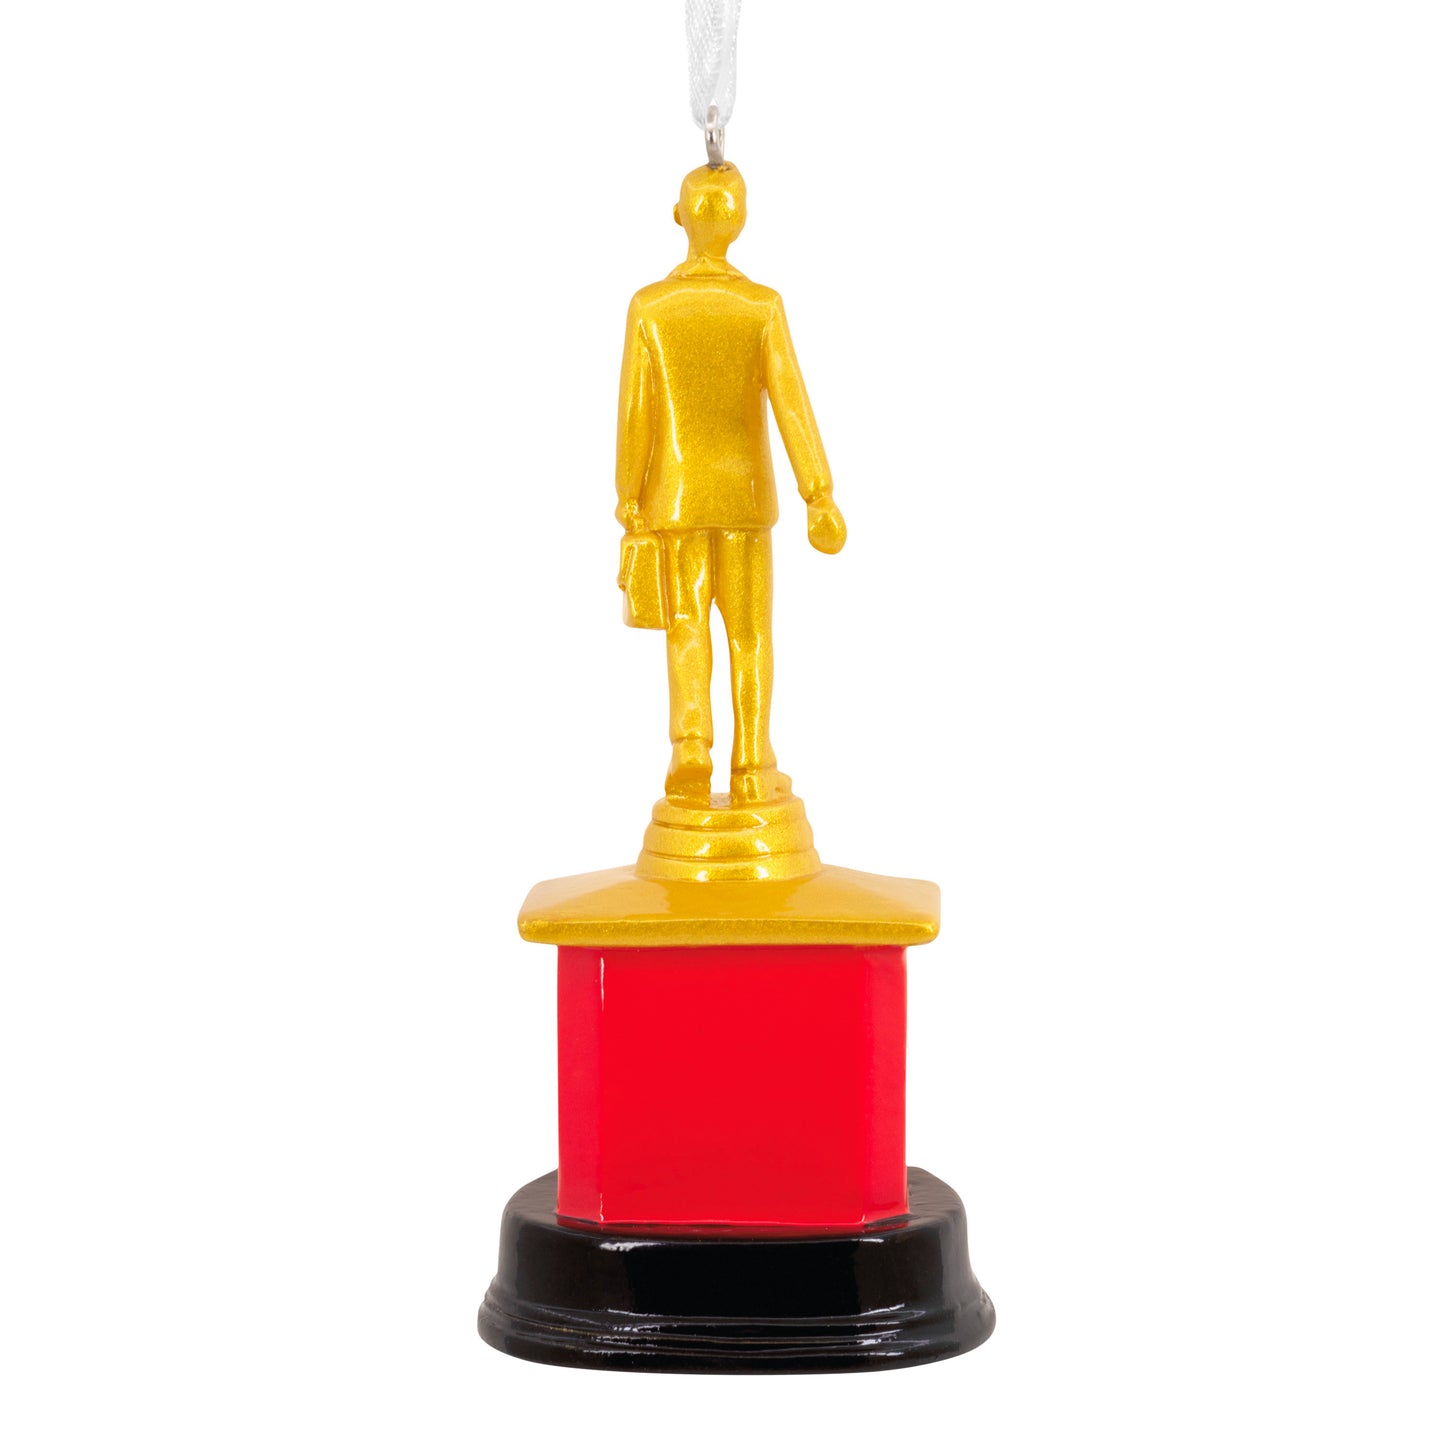 The Office Dundie Award Ornament